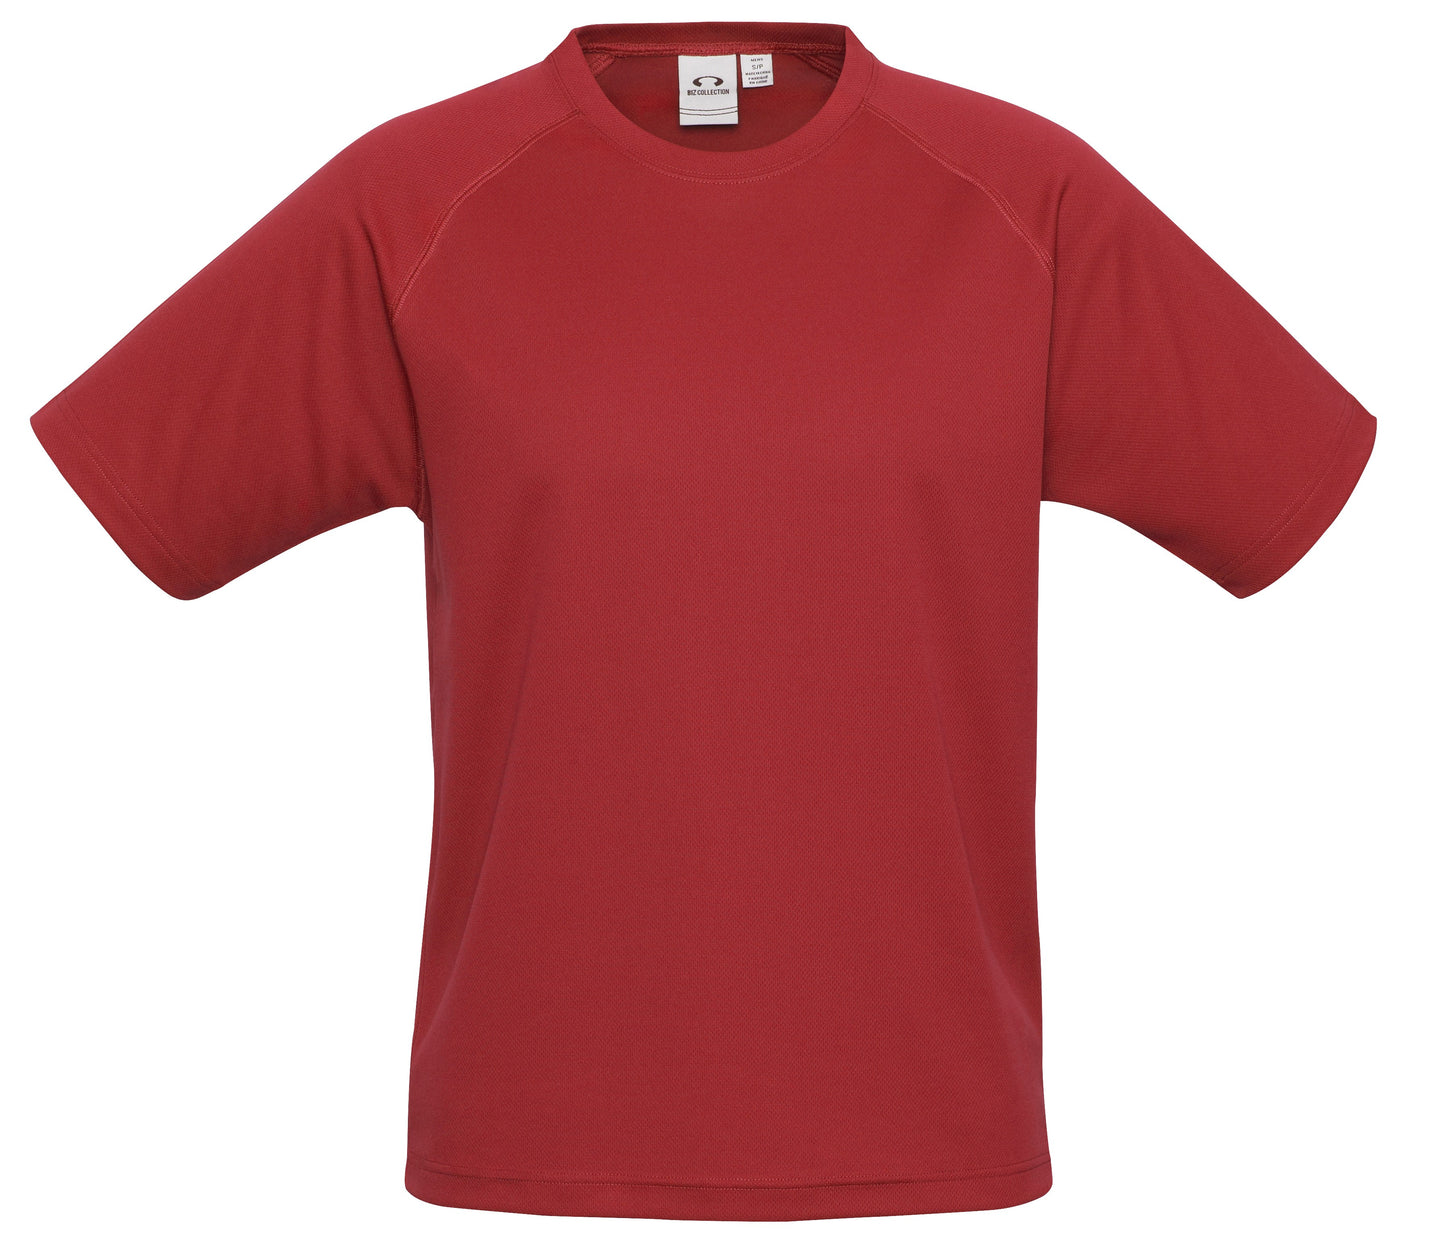 Mens Sprint T-Shirt - Red Only